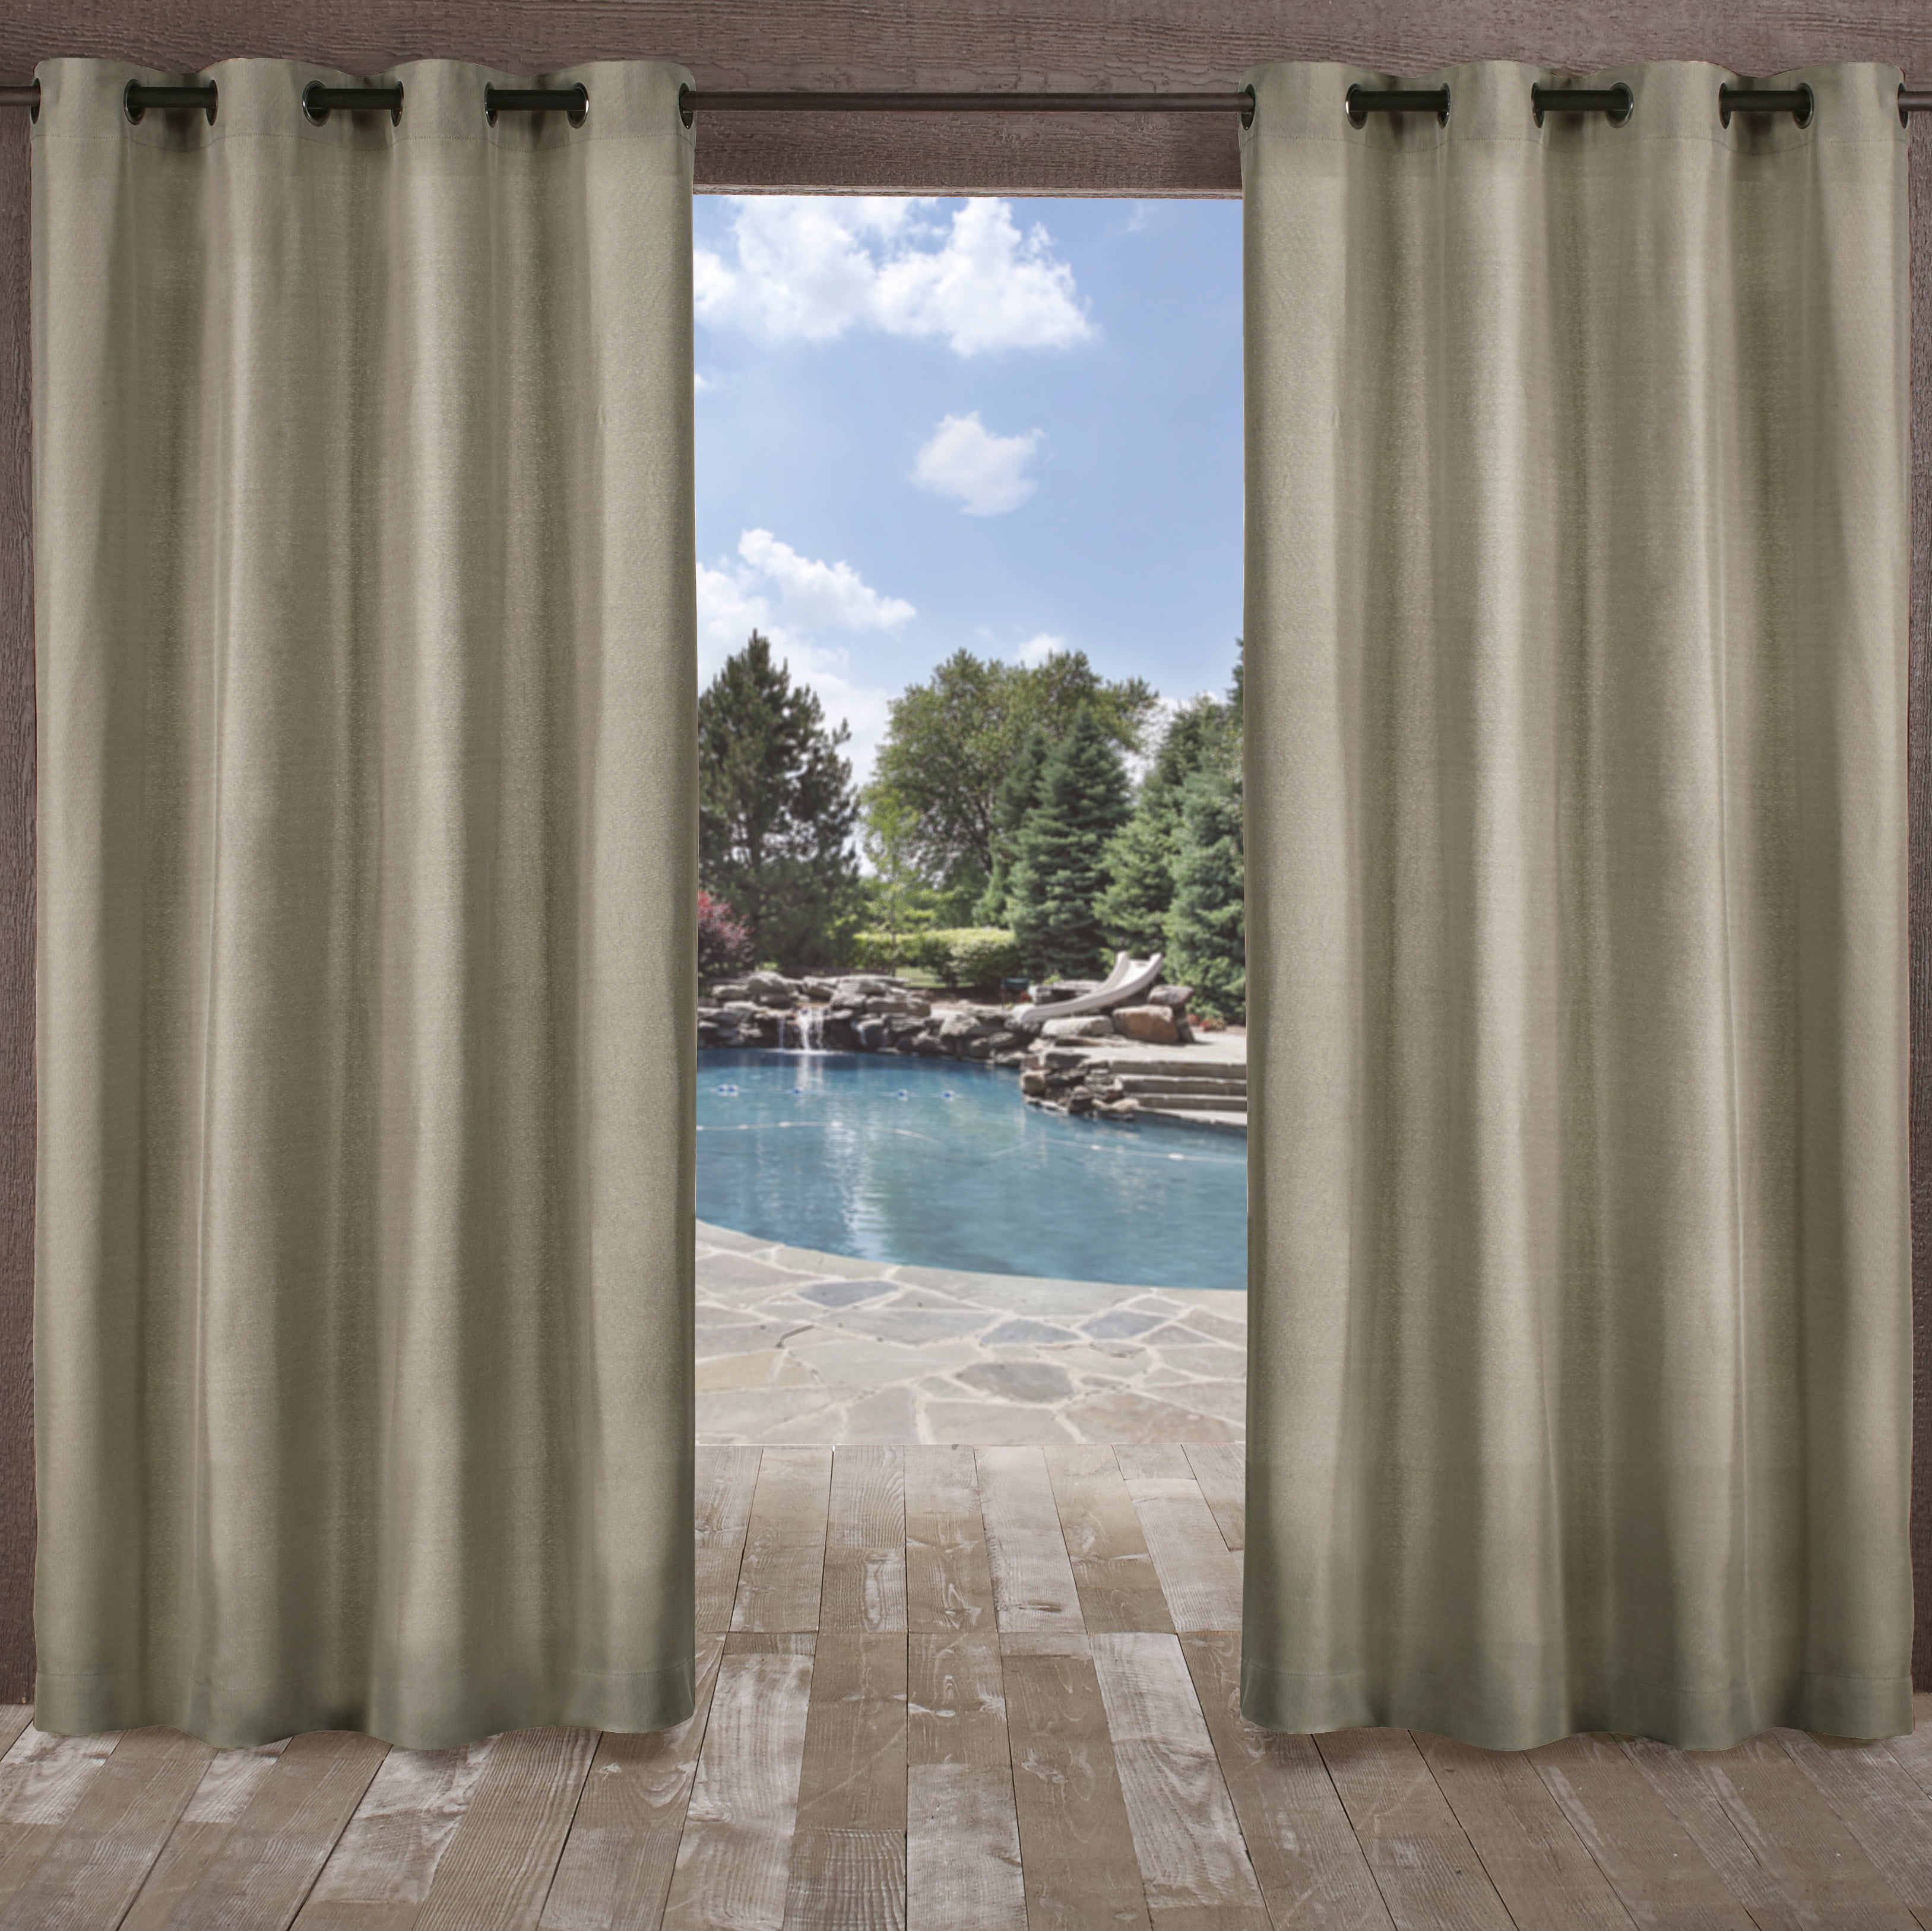 Details about   Exclusive Home Curtains Biscayne Indoor/Outdoor Two Tone Textured 54x84  pool bl 